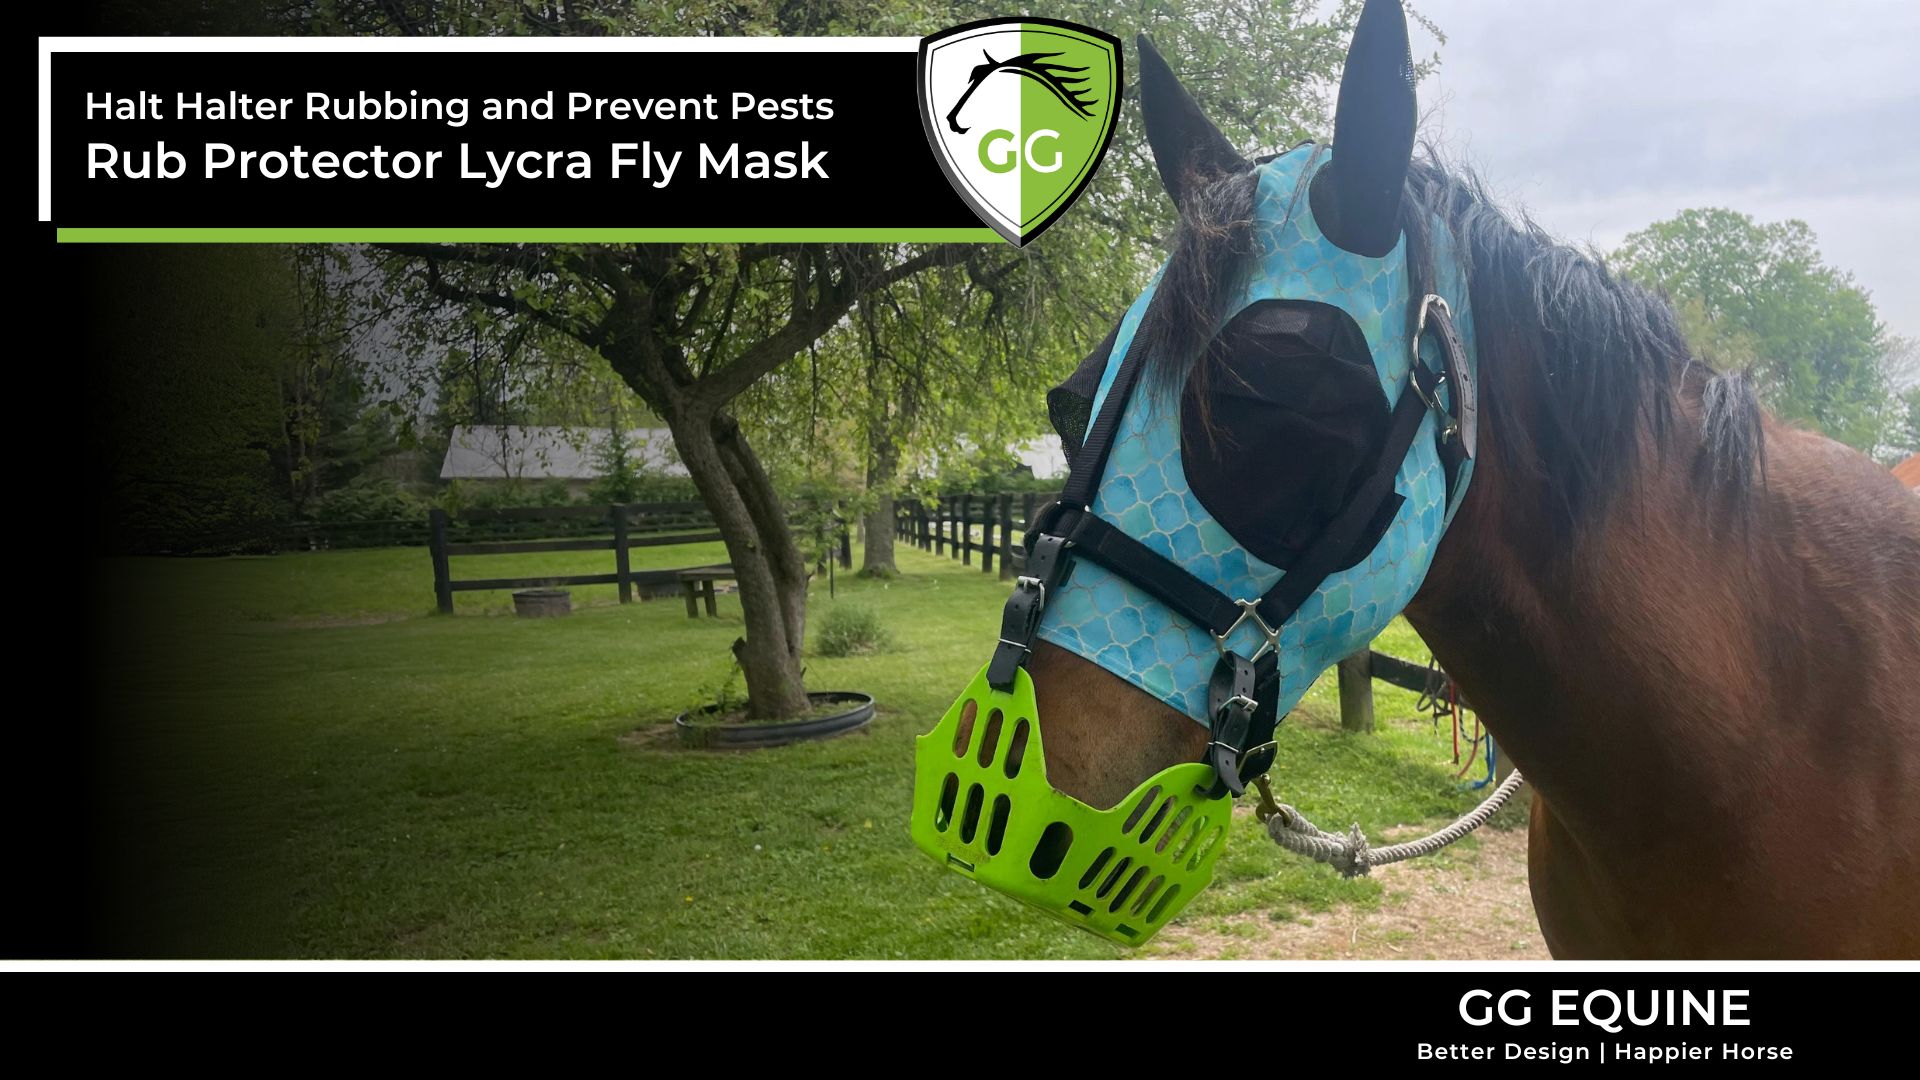 Load video: The GG Rub Protector Fly Mask prevents halter rubbing and keeps bugs away from your horse&#39;s face!